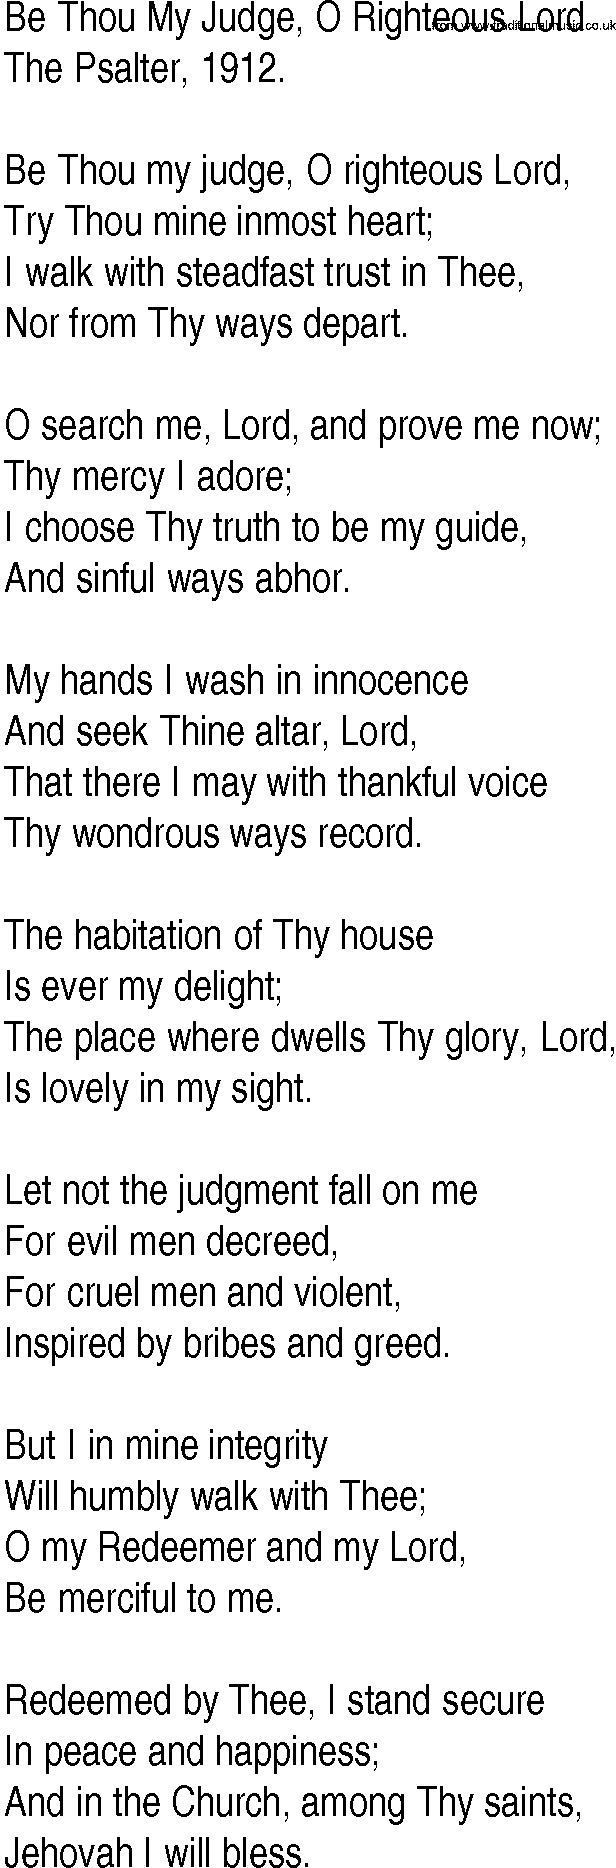 Hymn and Gospel Song: Be Thou My Judge, O Righteous Lord by The Psalter lyrics